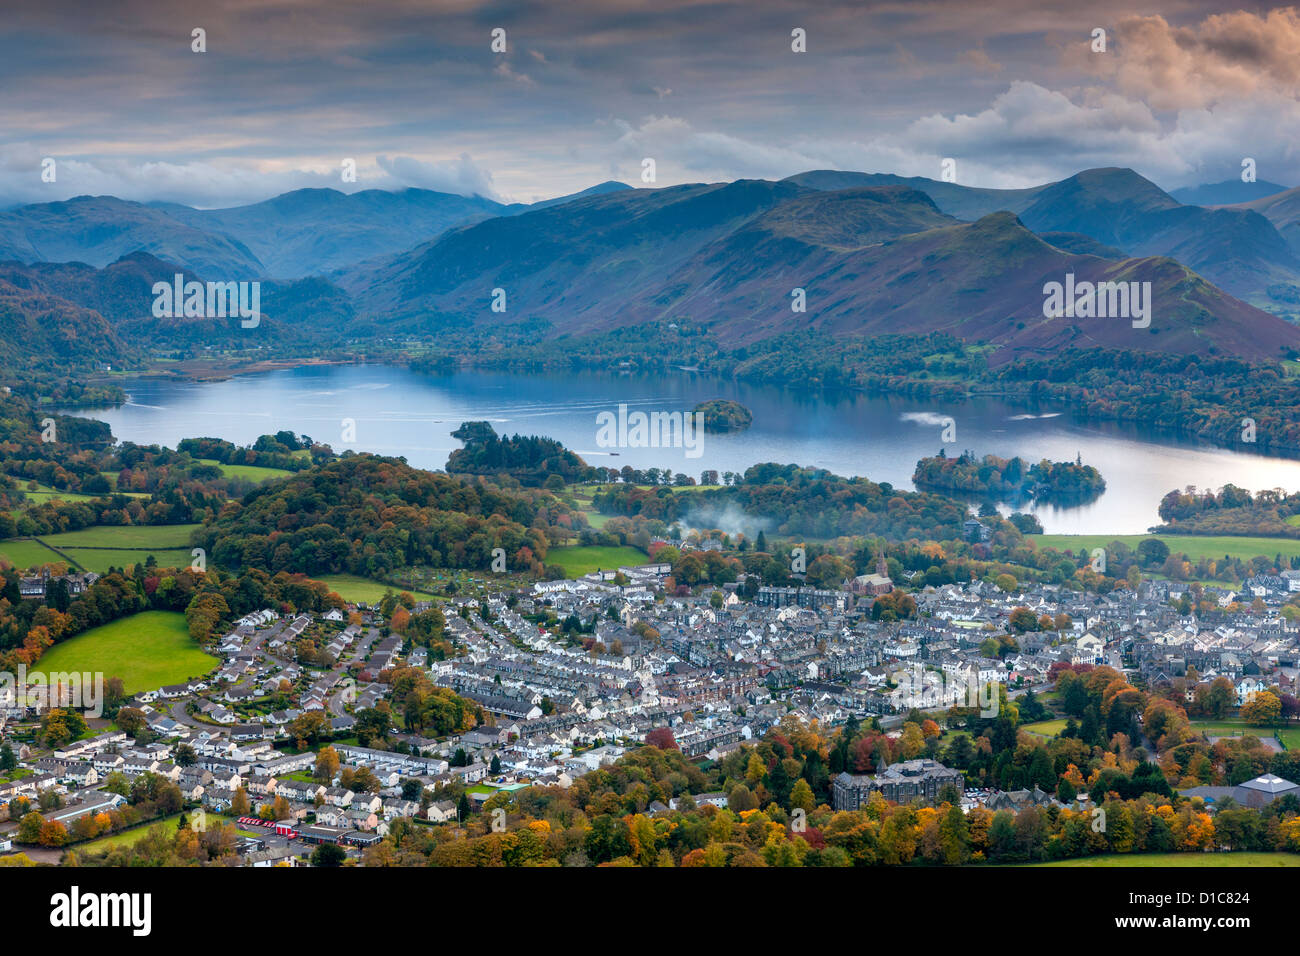 View over Keswick and Derwent Water from Latrigg summit, Lake District National Park. Stock Photo